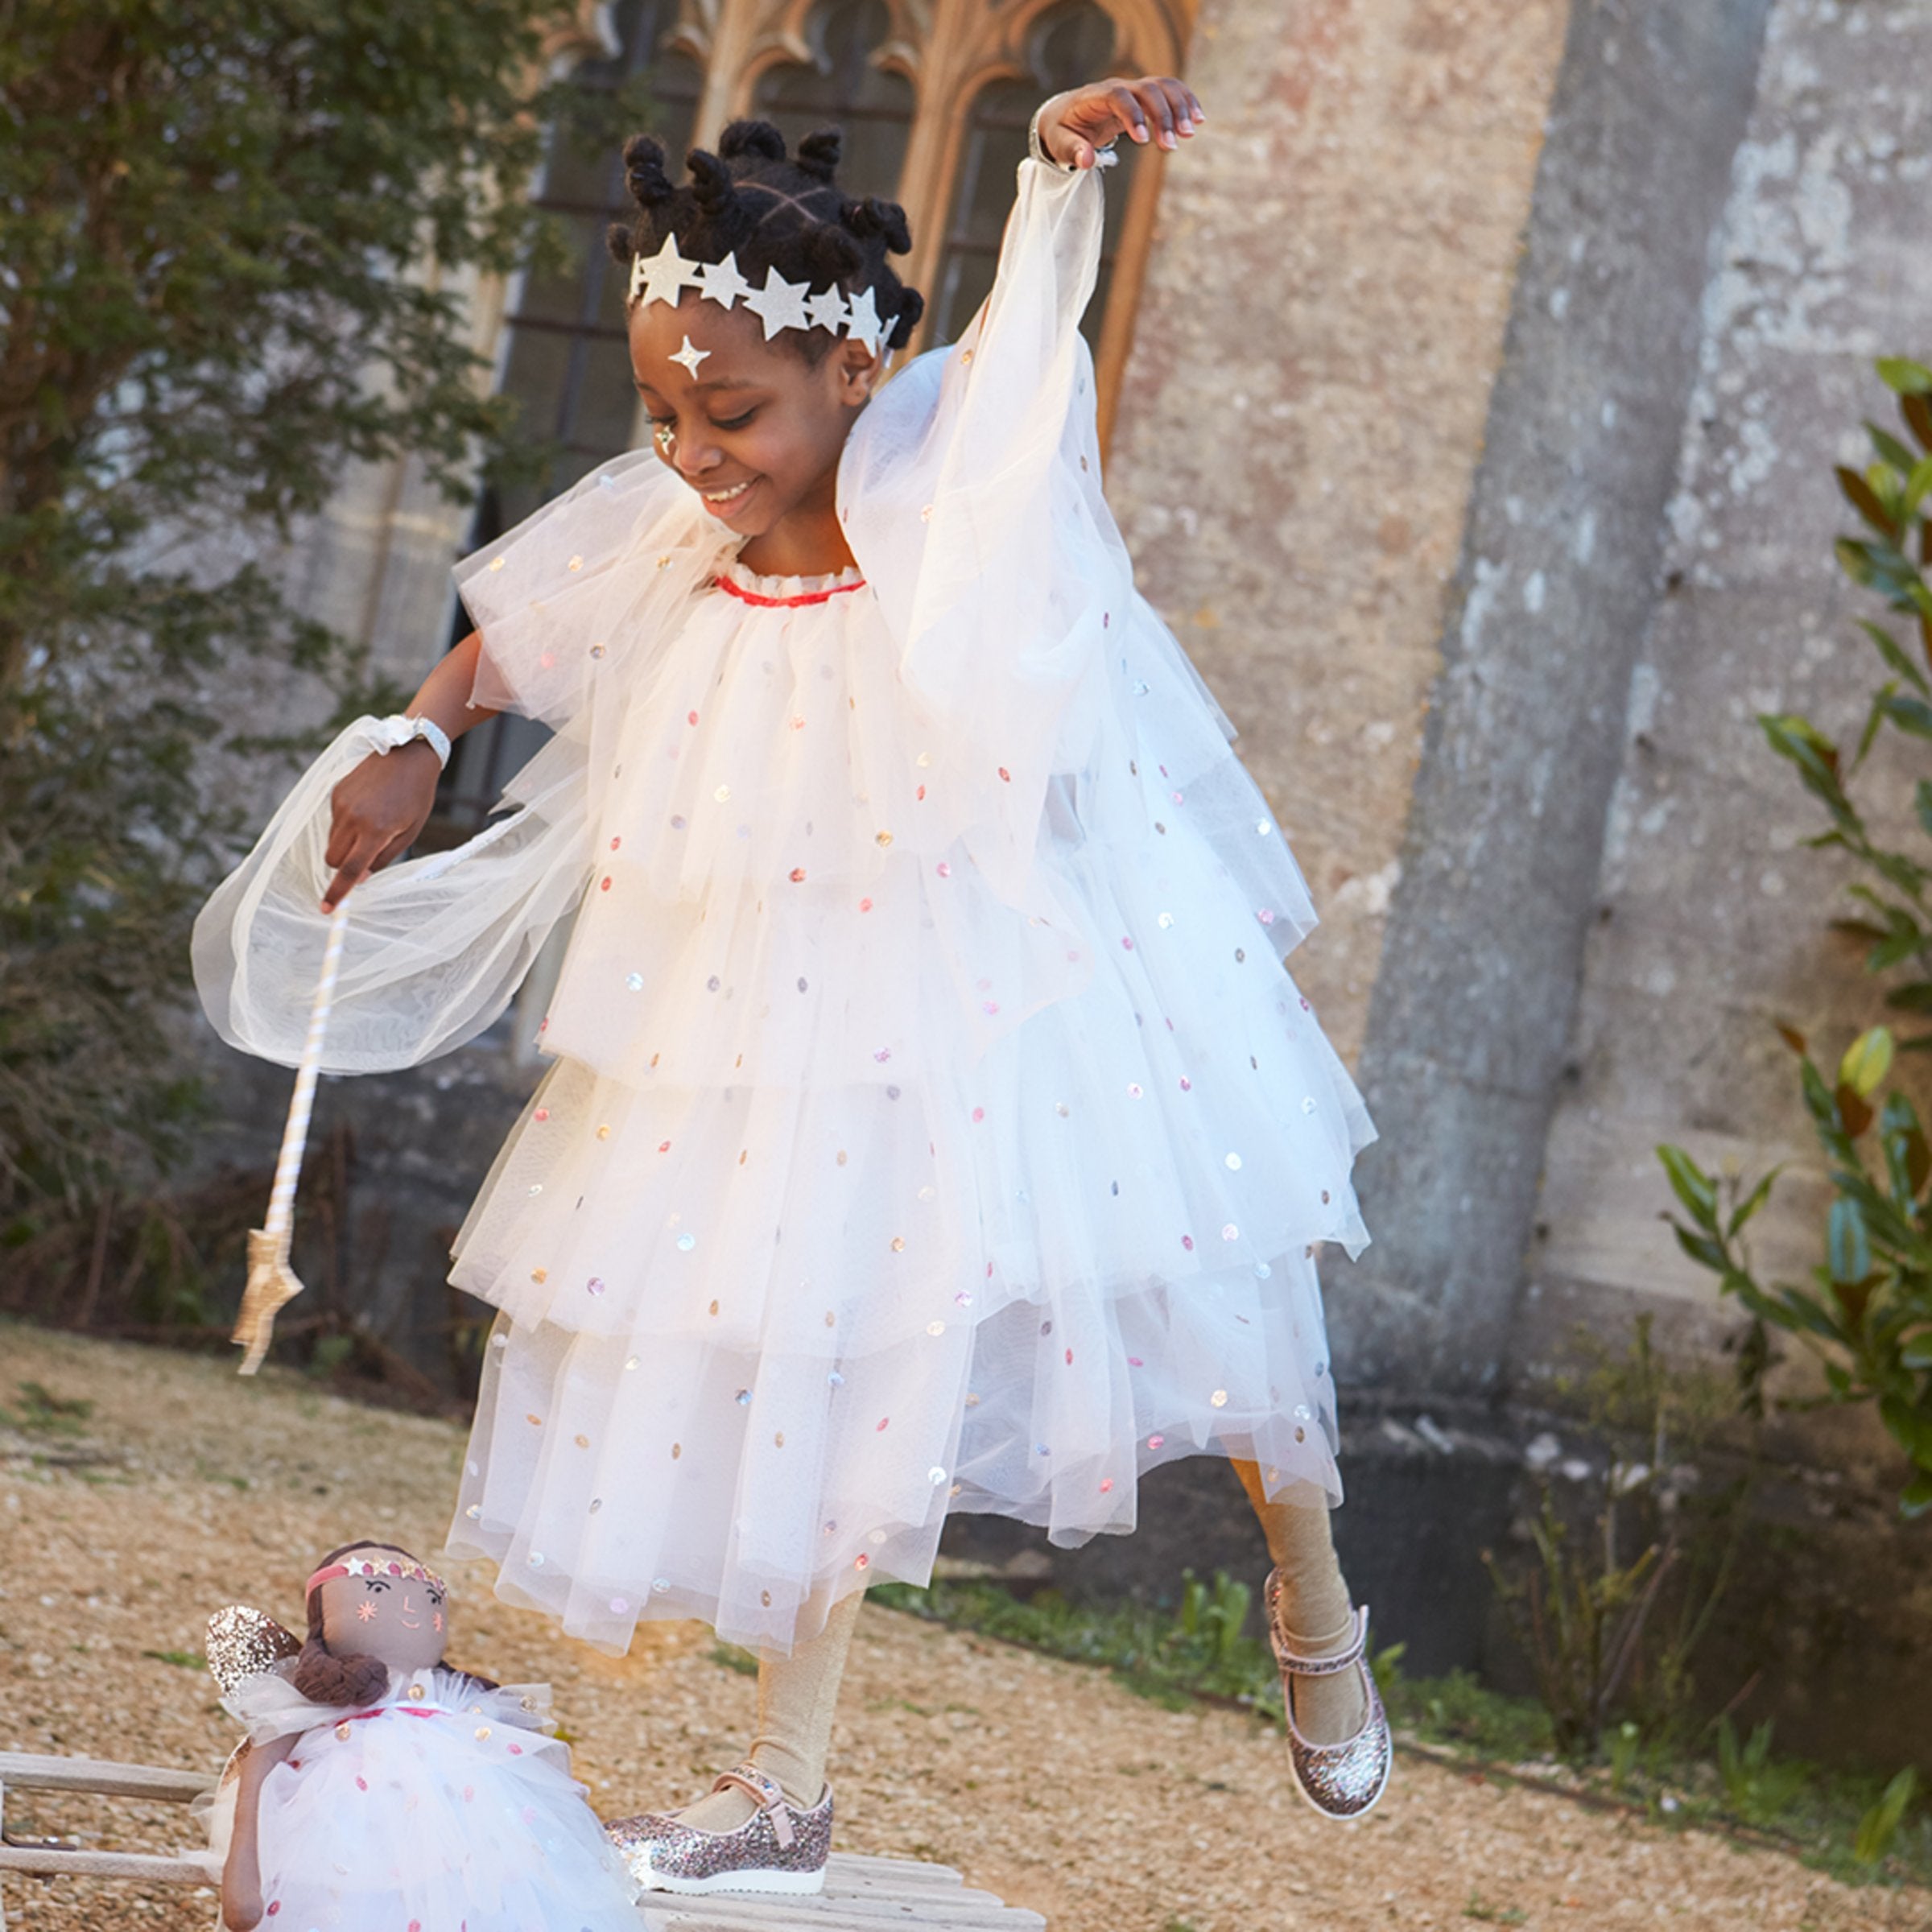 Our angel costume for kids includes a dress, wings and star headband.